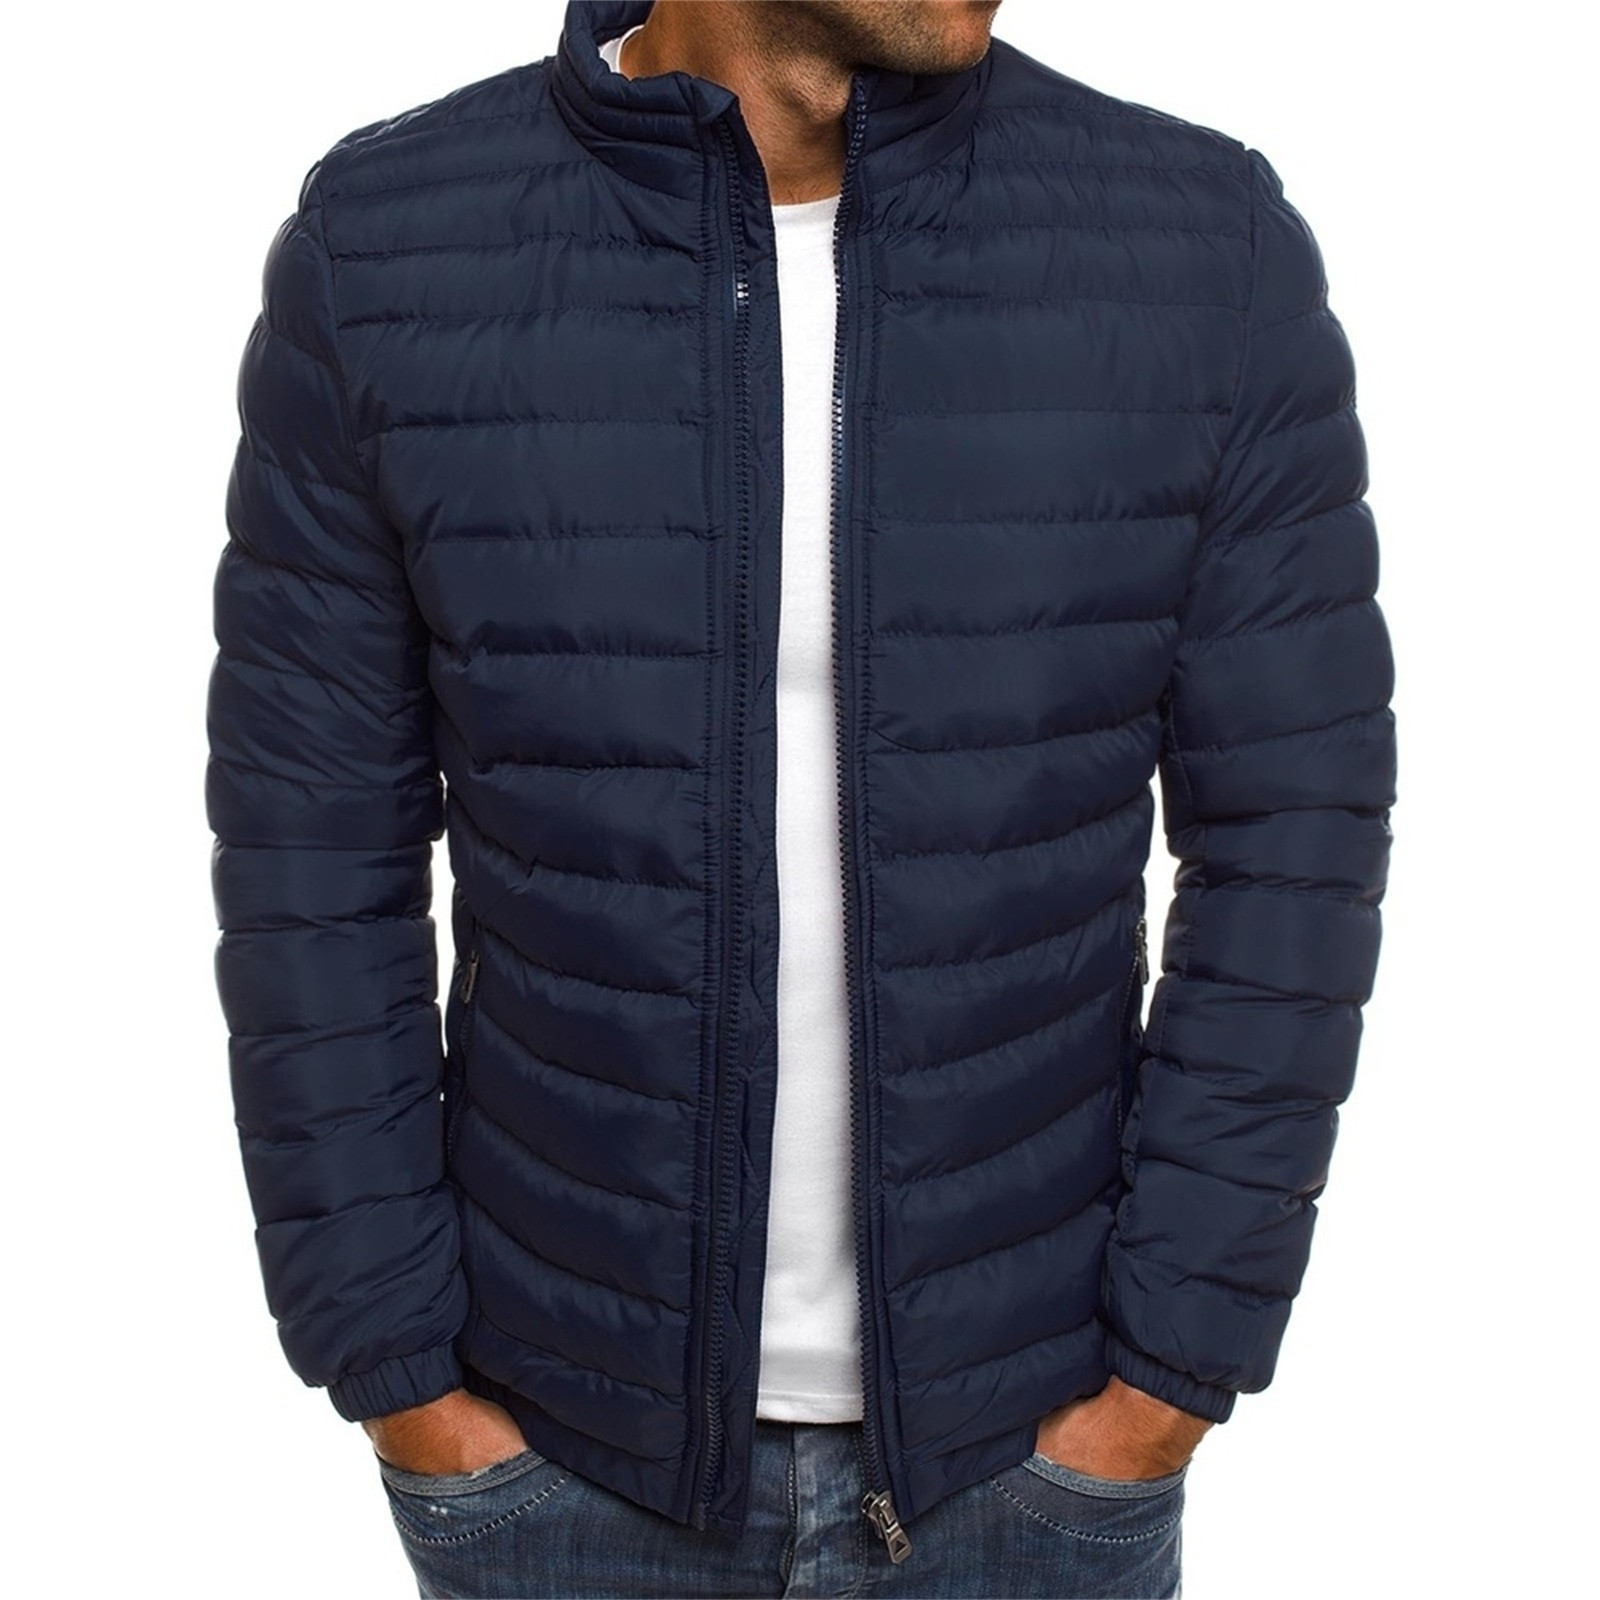 TIHLMK Men's Down Jackets & Coats Deals Clearance Men's Solid Color Jacket Cotton Padded Jacket Fashion Cotton Padded Jacket Men's Warm Cotton Padded Jacket Navy - image 2 of 3